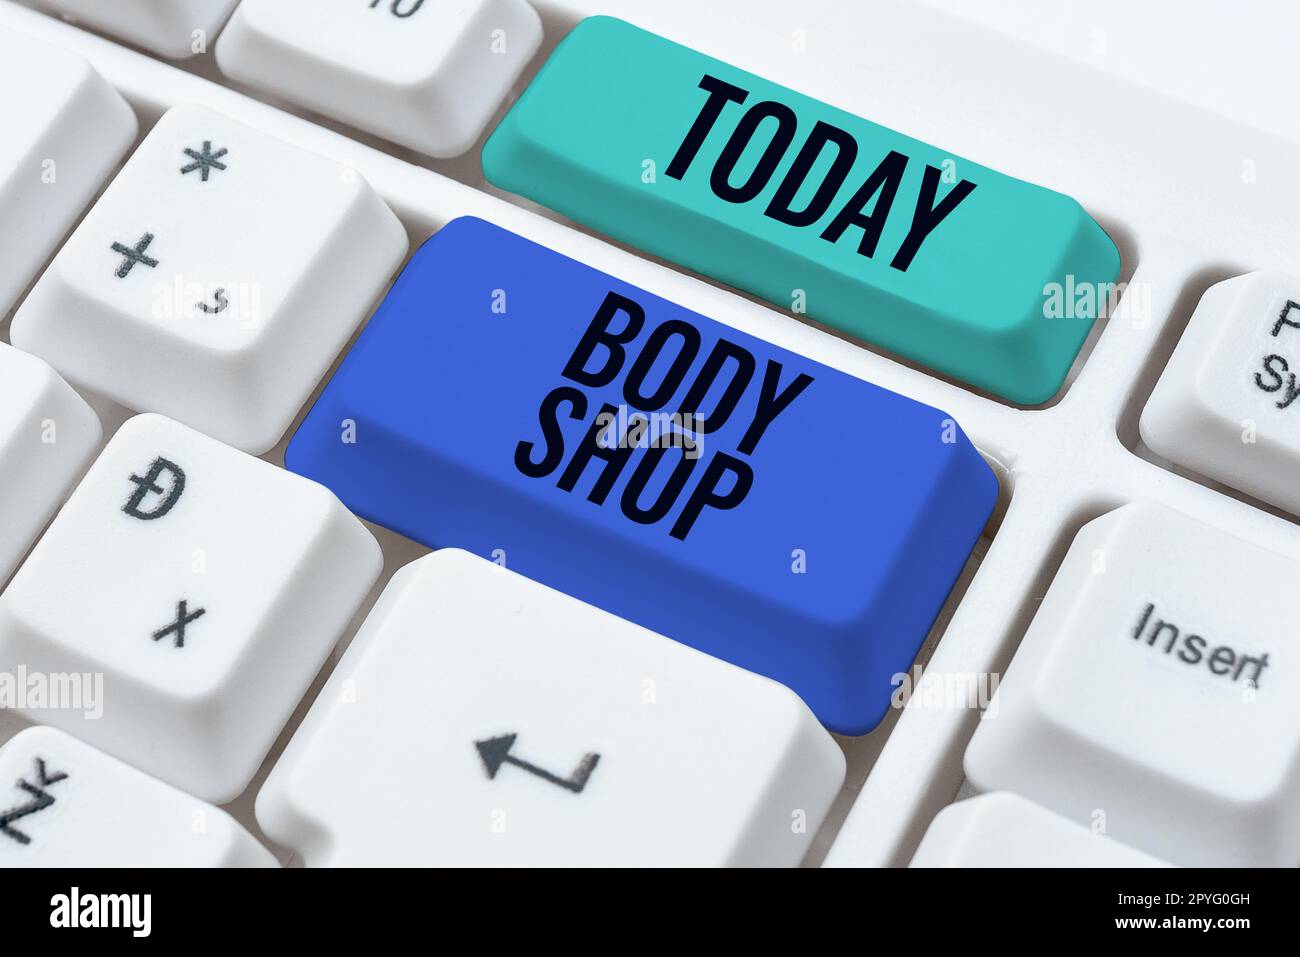 Text sign showing Body Shop. Business idea a shop where automotive bodies are made or repaired Stock Photo